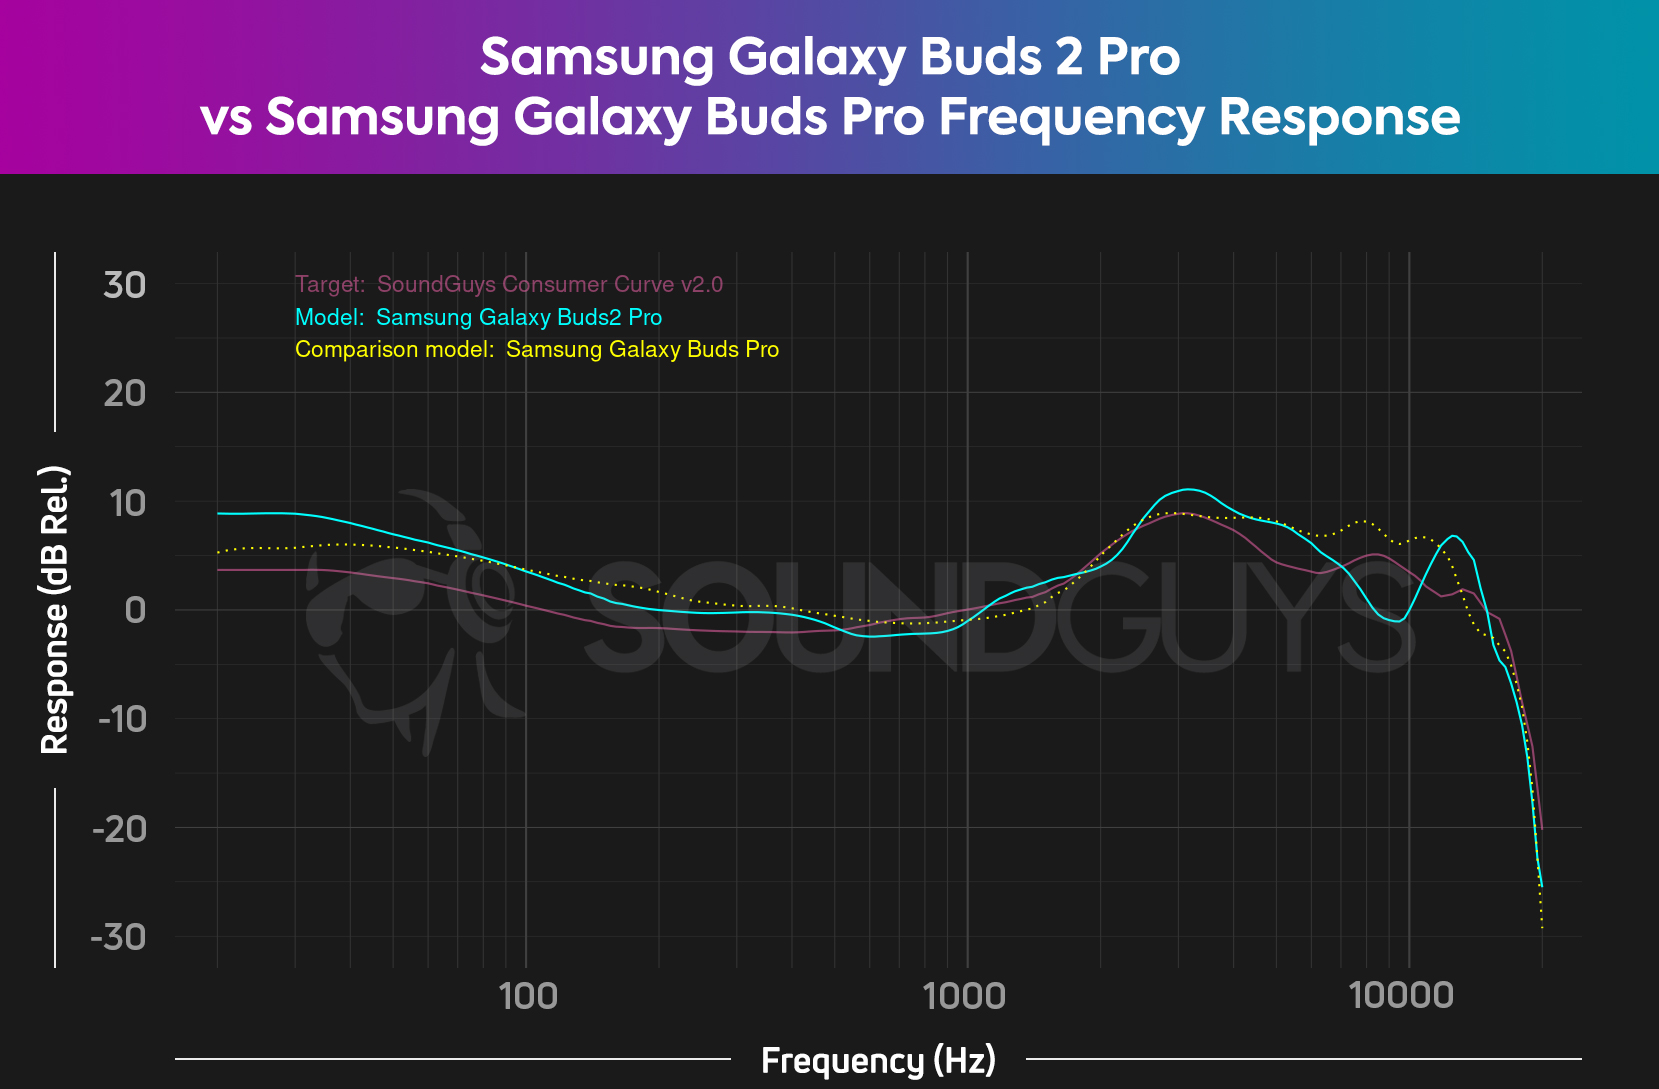 A chart showing the similar frequency responses of the Samsung Galaxy Buds 2 Pro and Samsung Galaxy Buds Pro against our target curve.